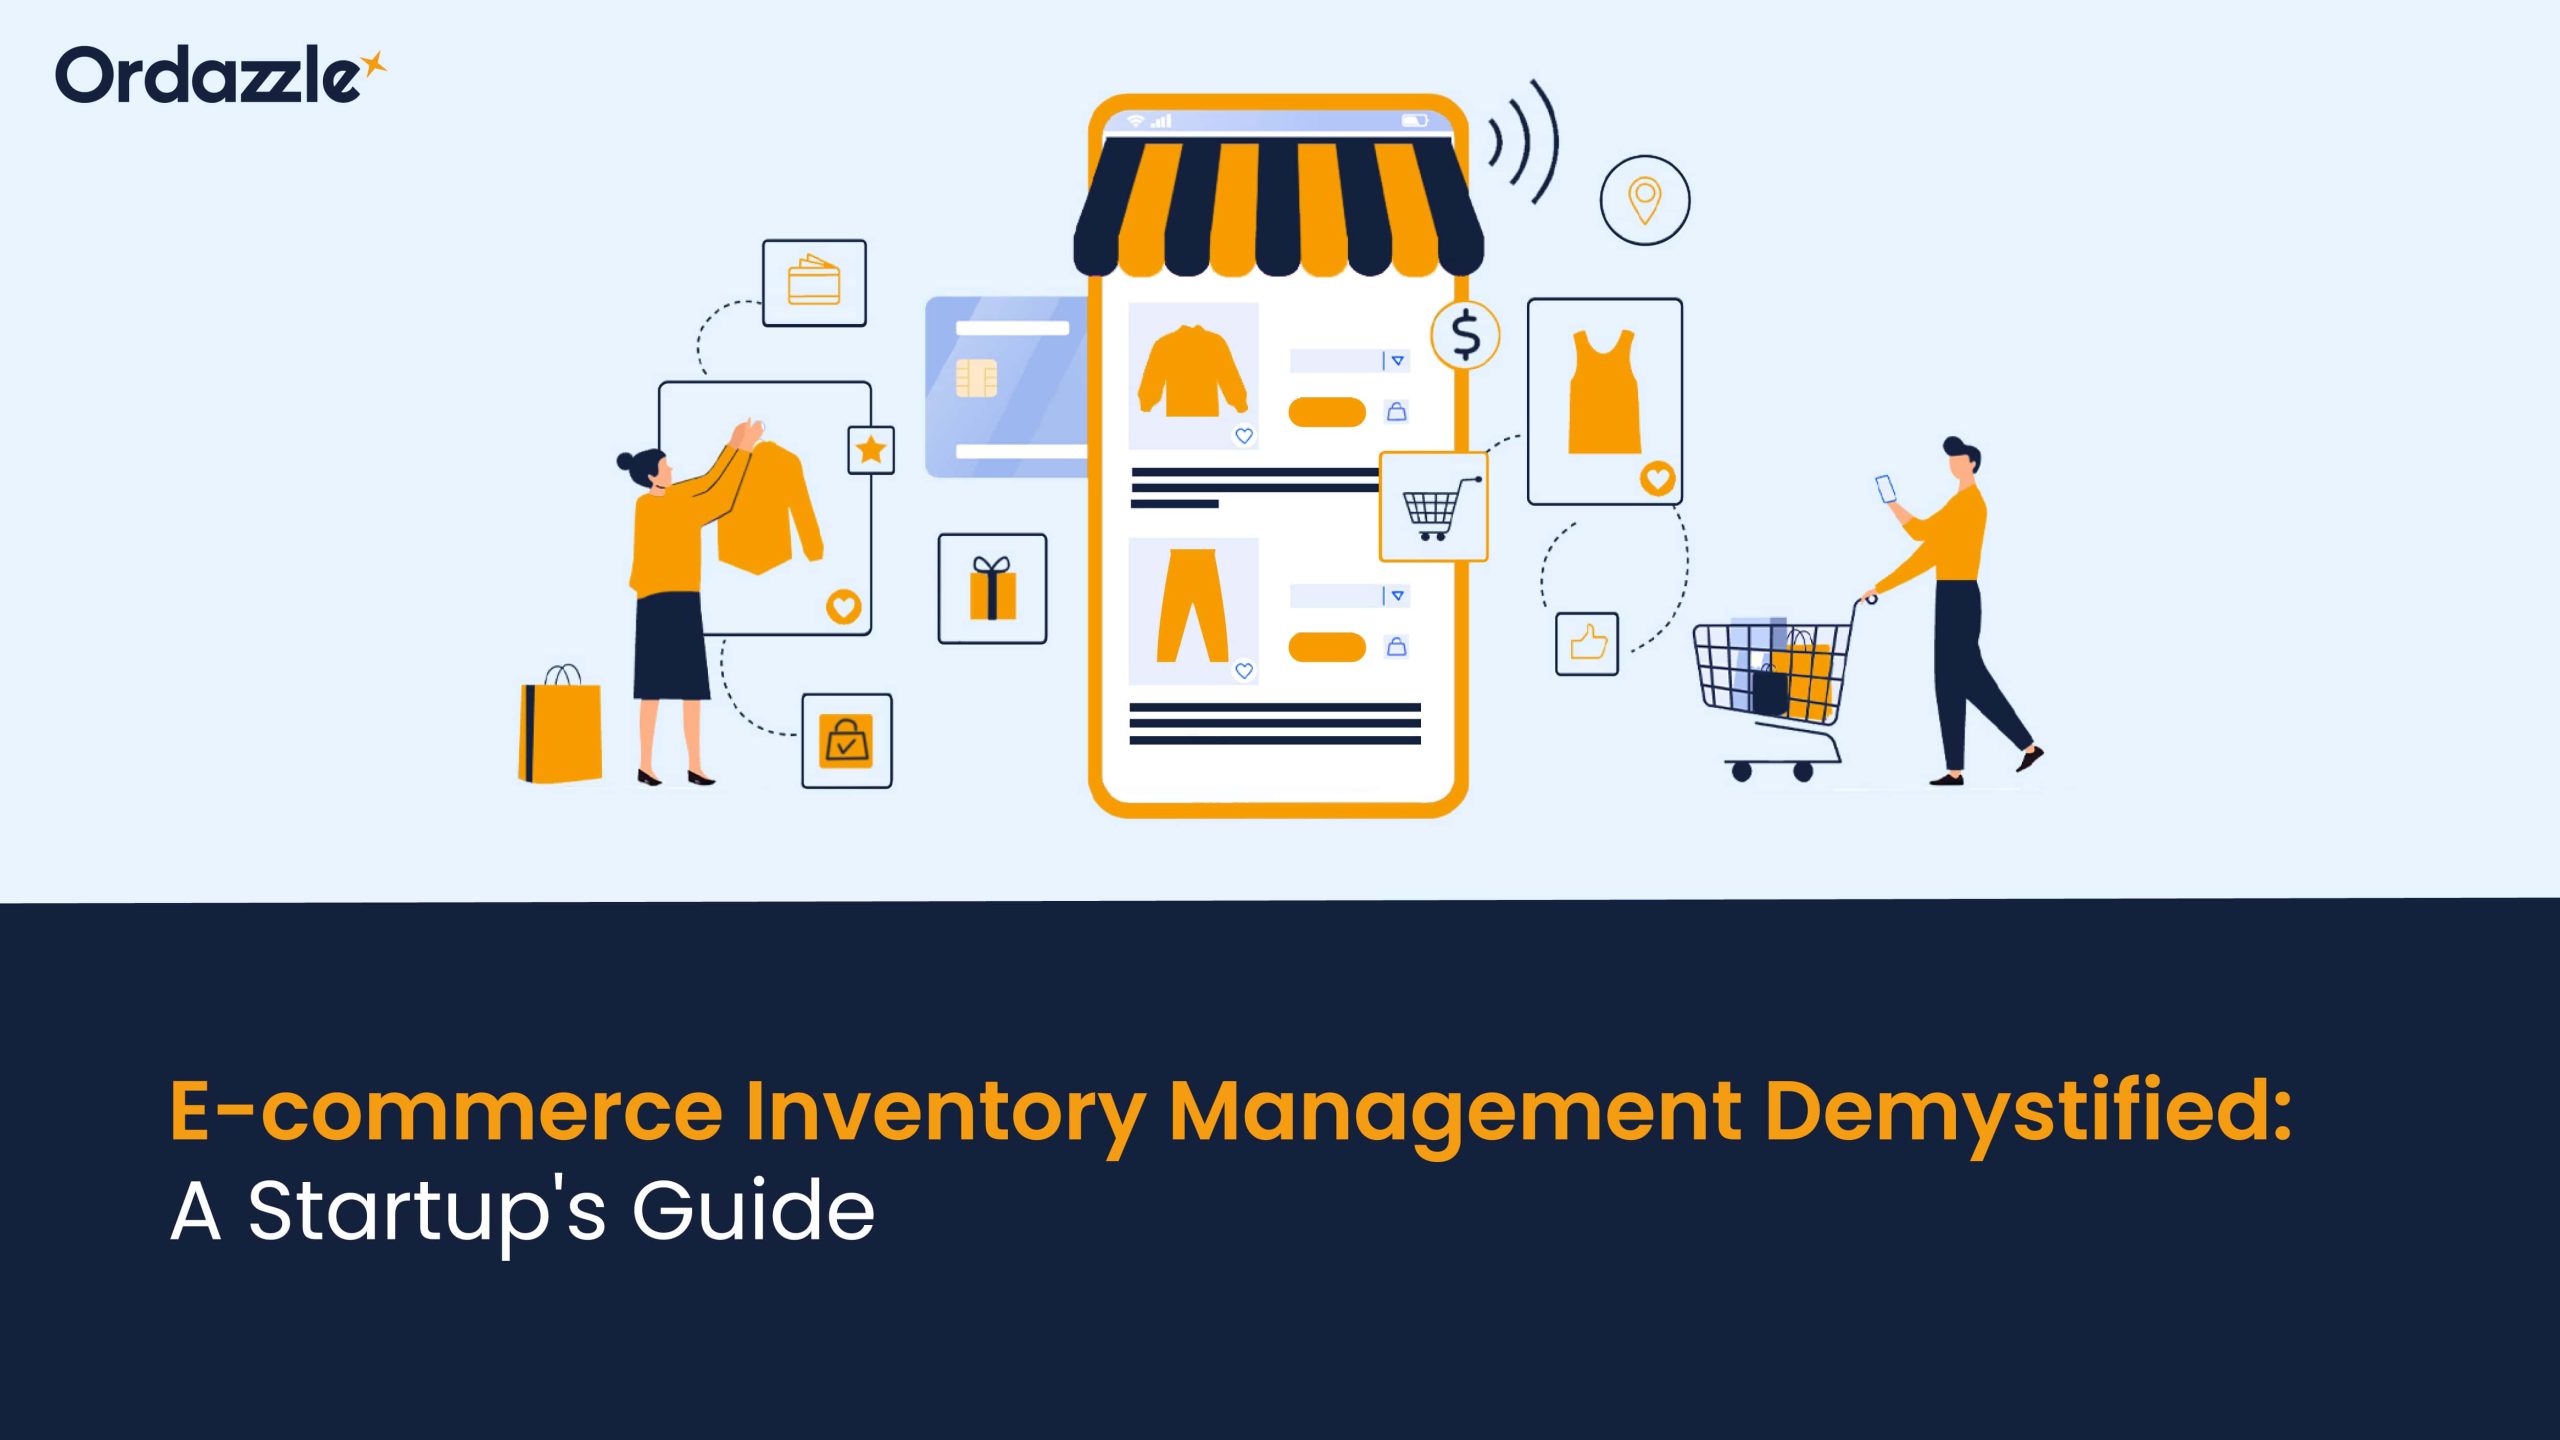 E-commerce Inventory Management Demystified